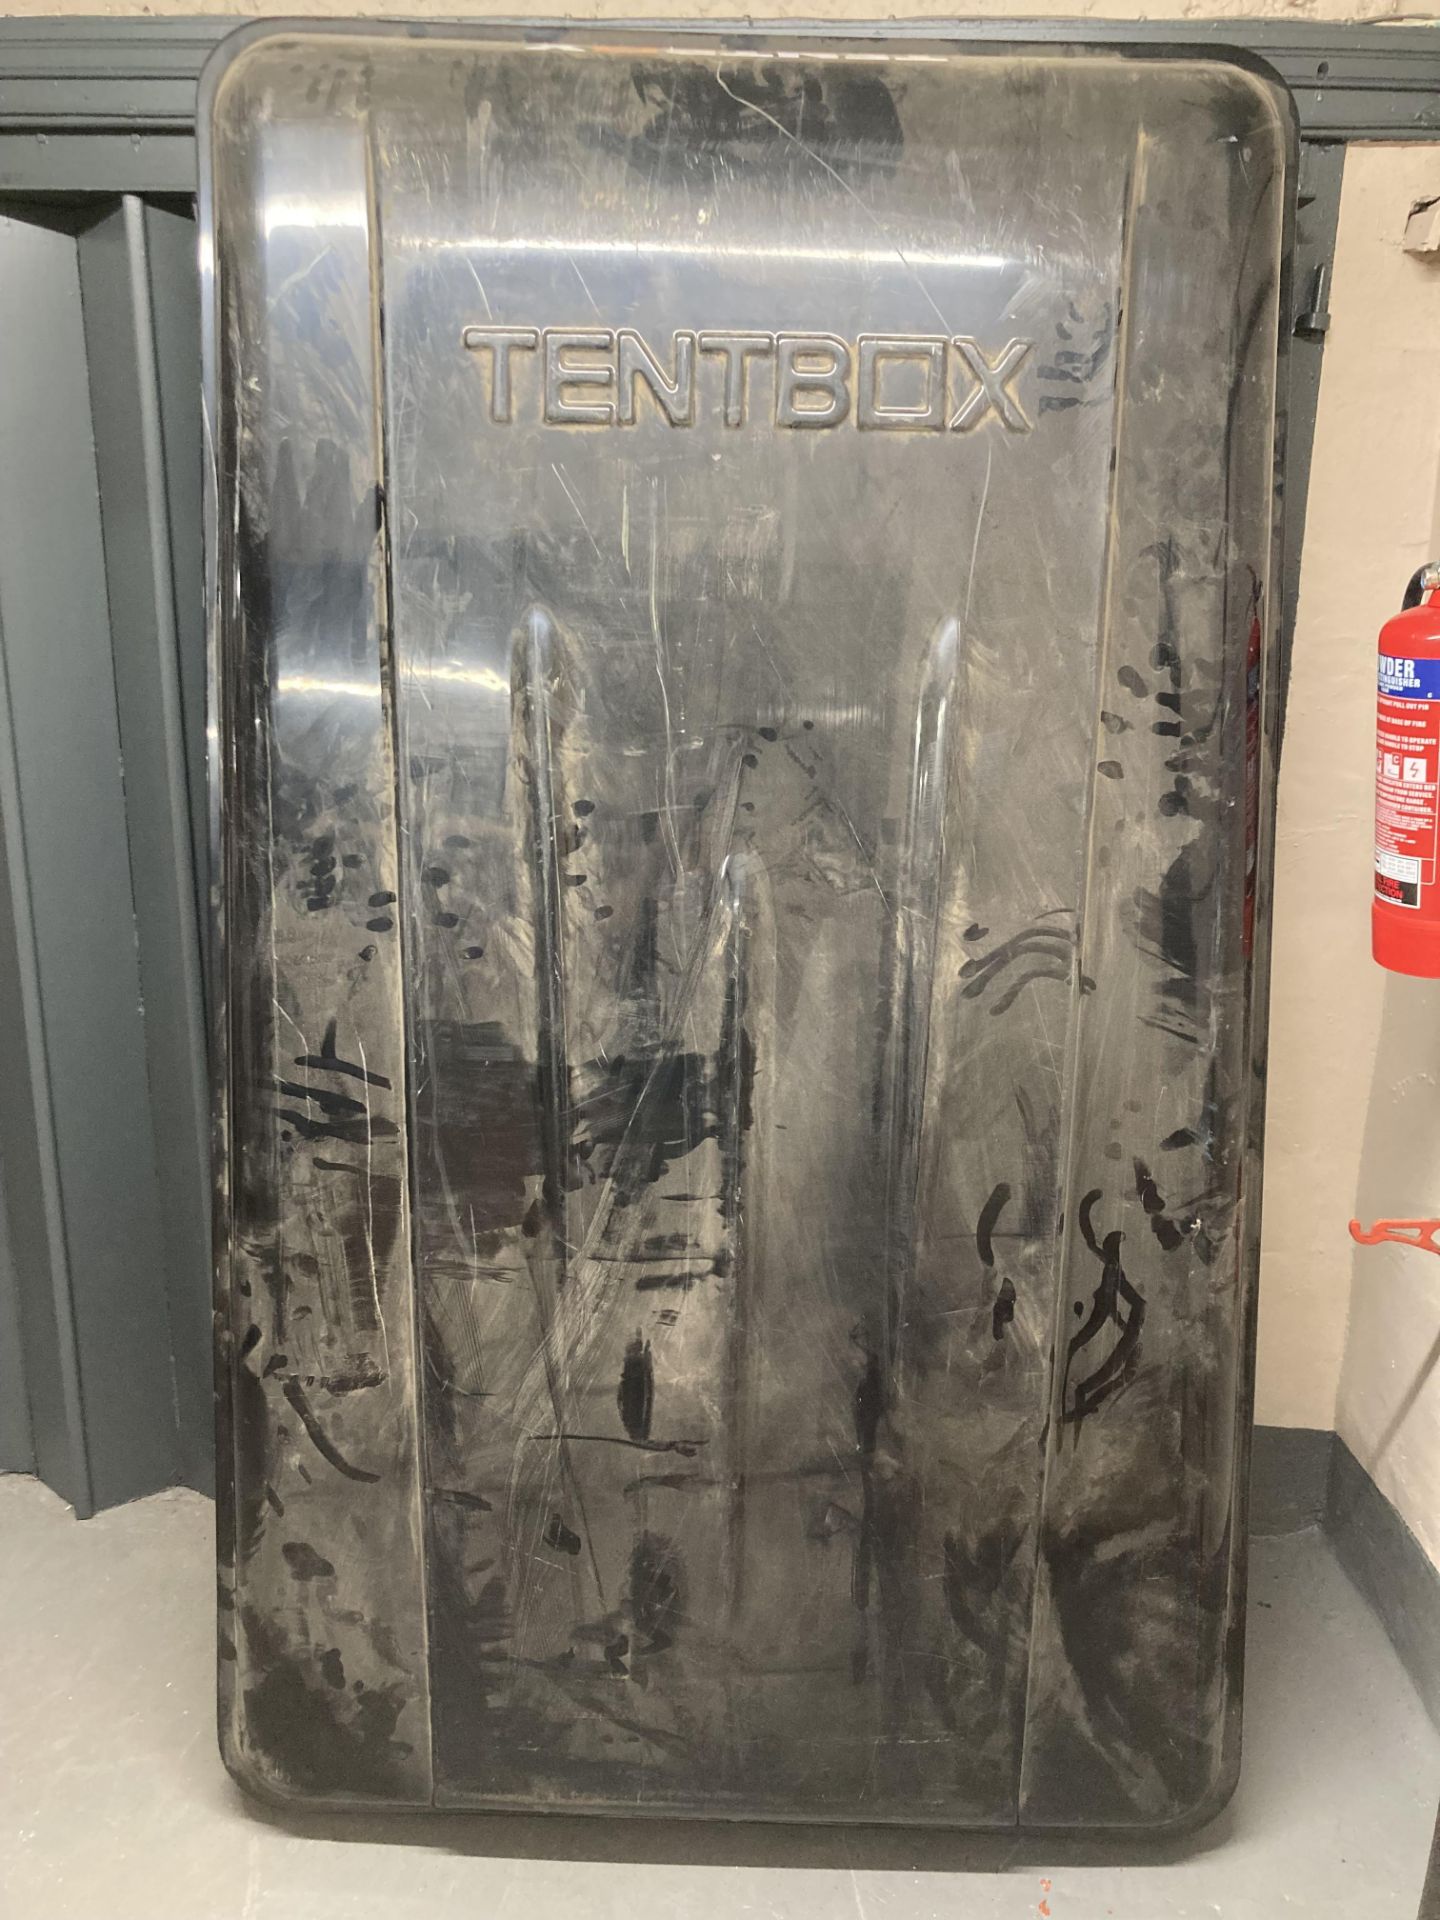 A Tentbox CONDITION REPORT: Transit scuffs and marks,